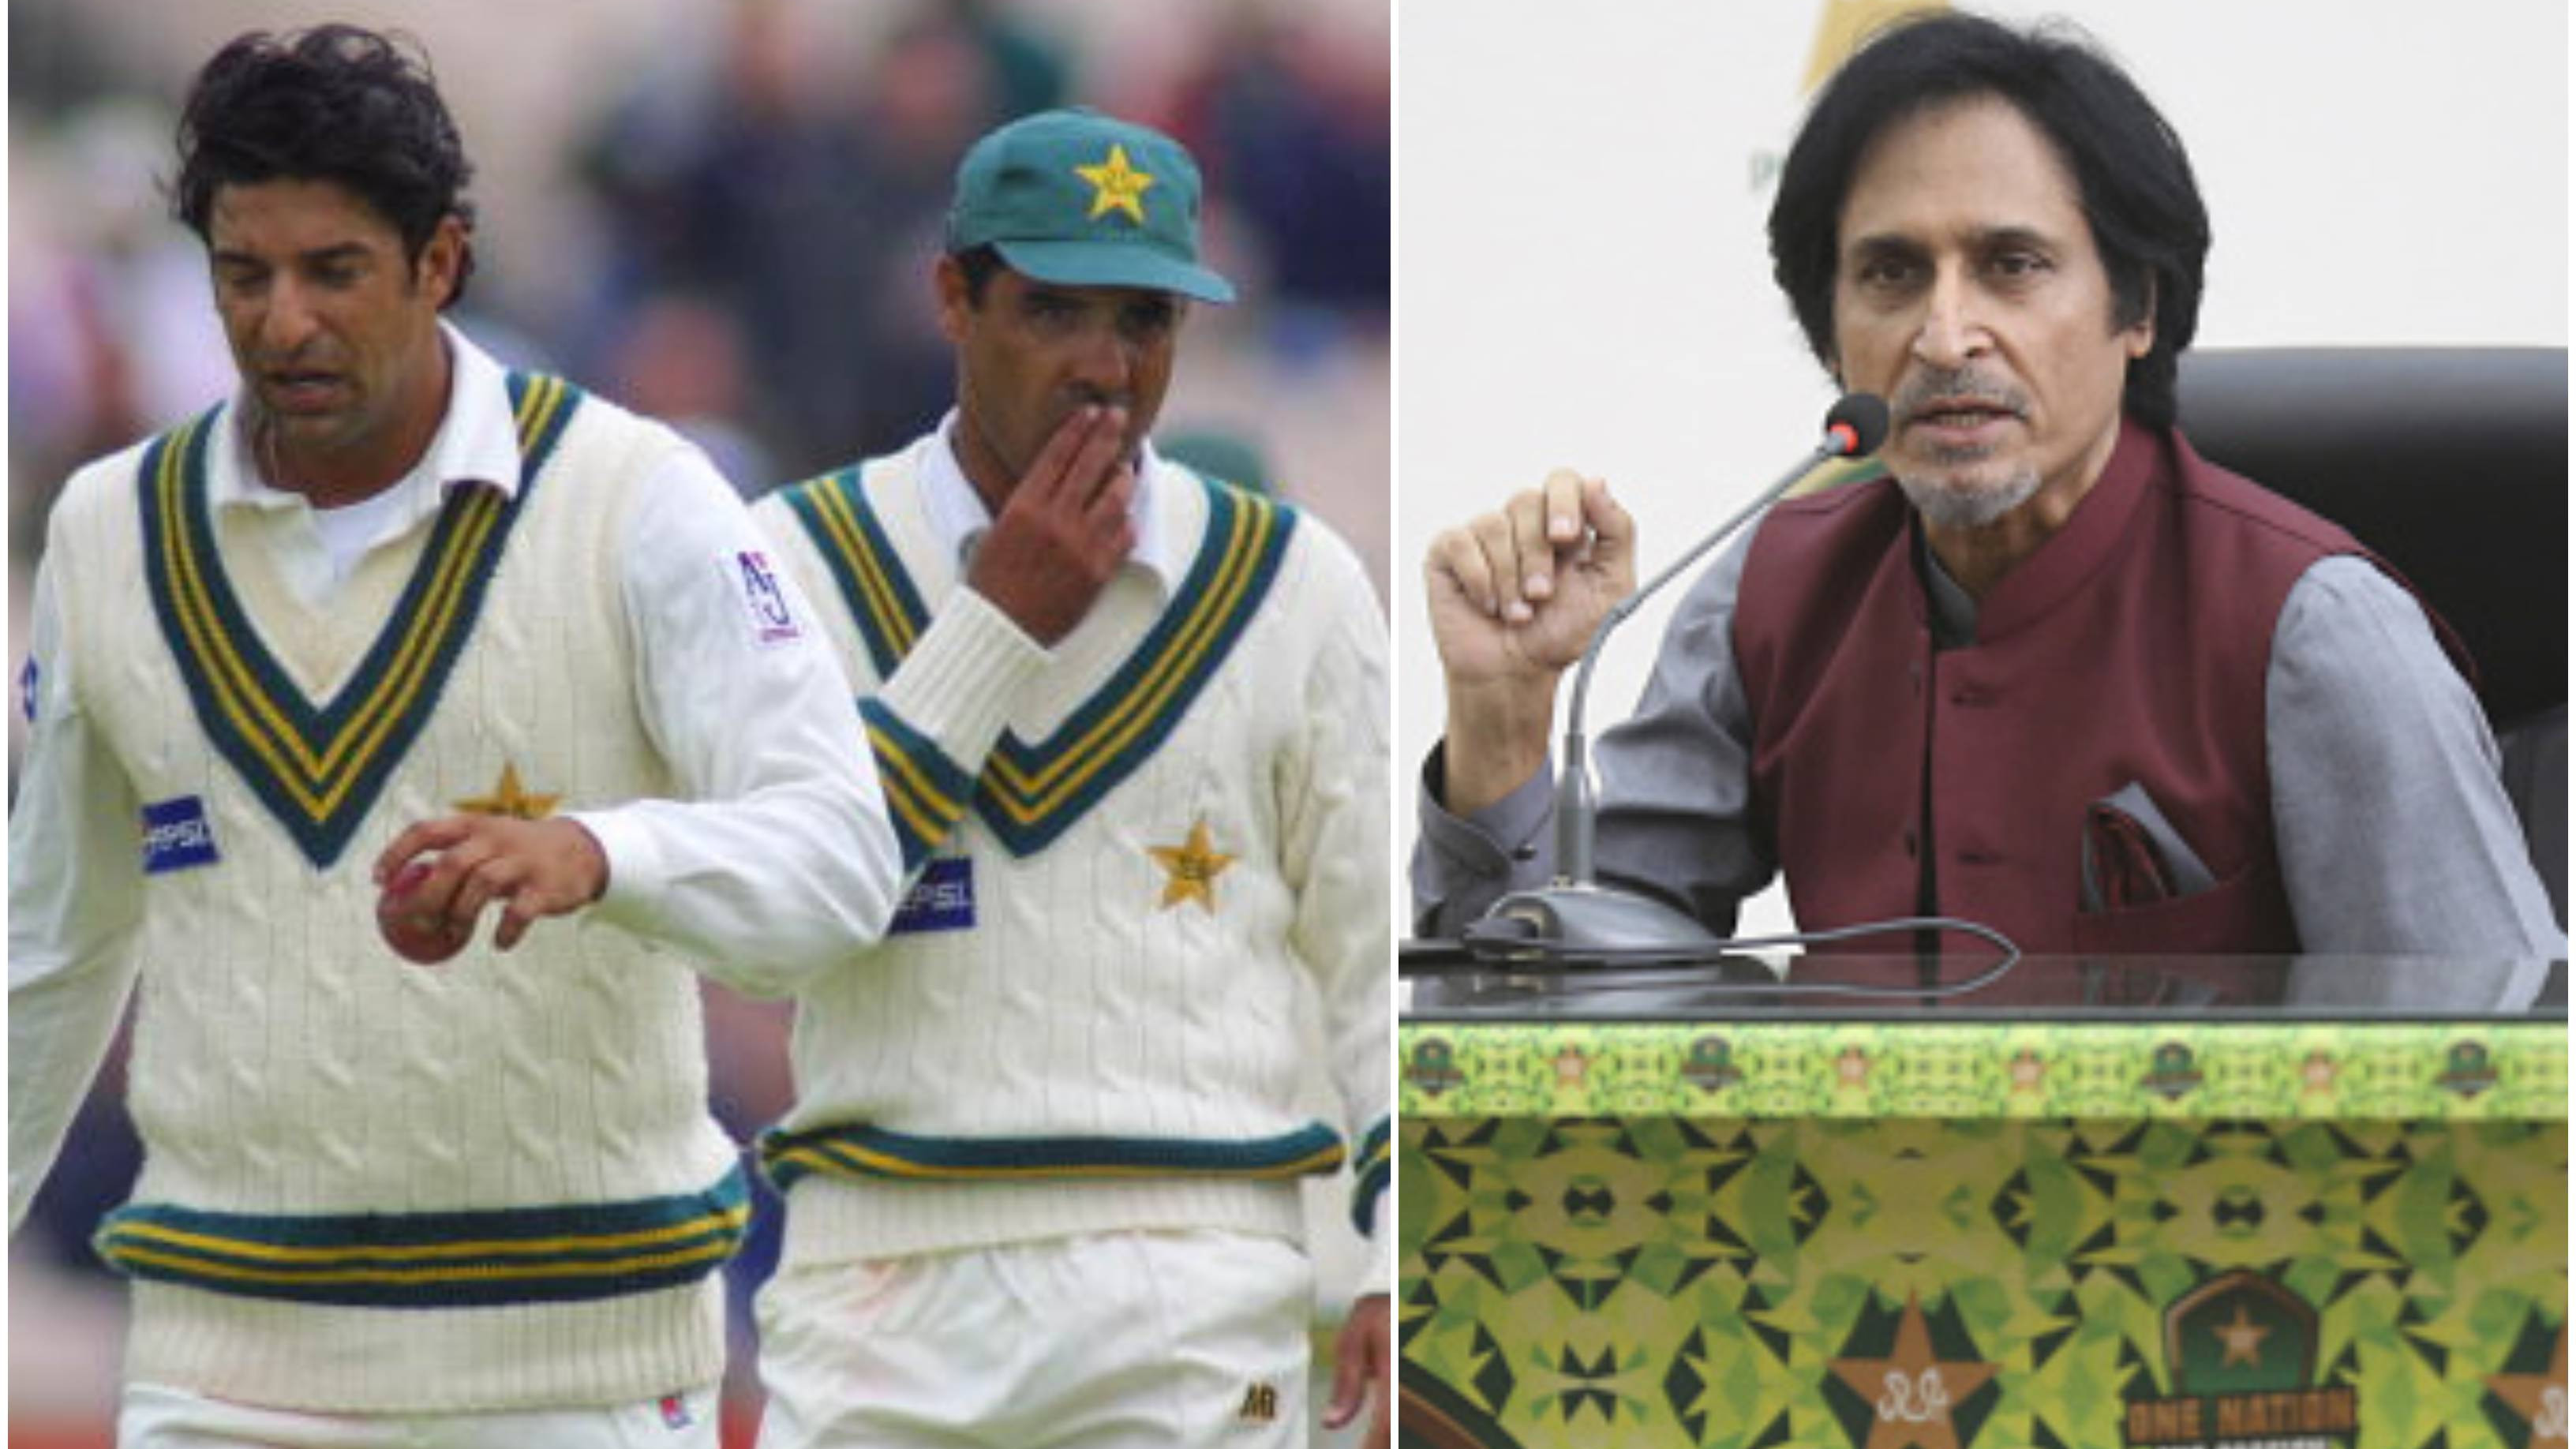 “Would've banned them forever,” Ramiz Raja on Wasim & Waqar while referring to Justice Qayyum's report on match-fixing